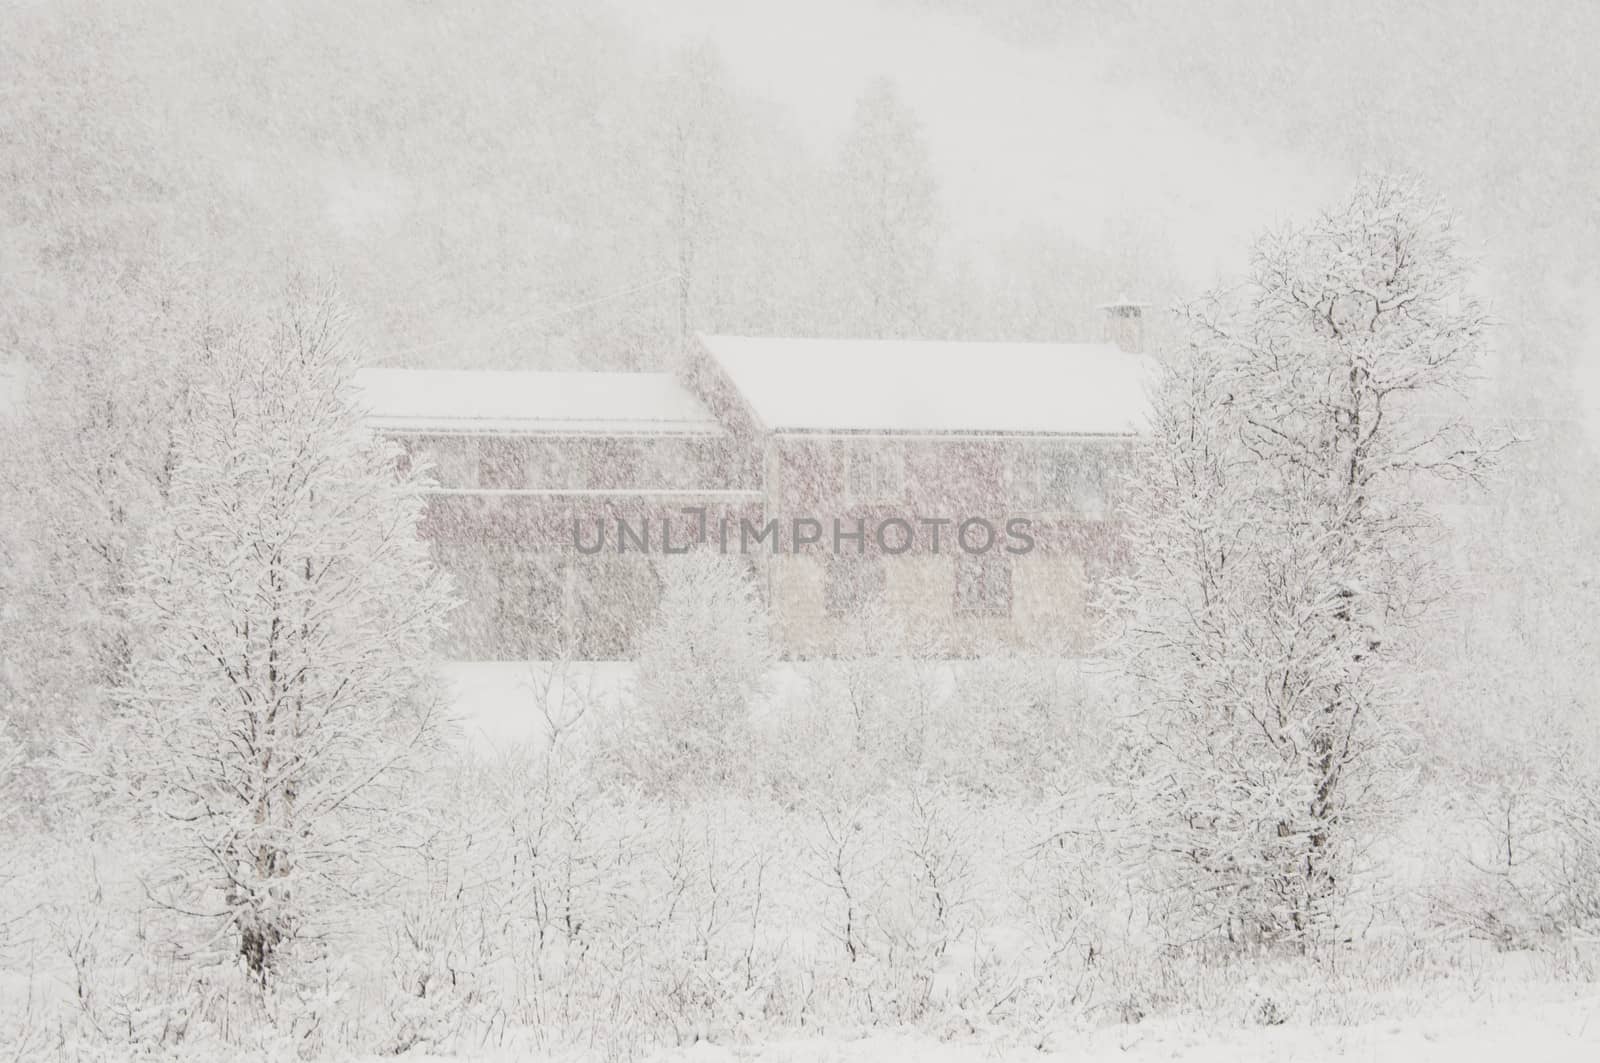 A red house almost invisible in heavy snowfall, 